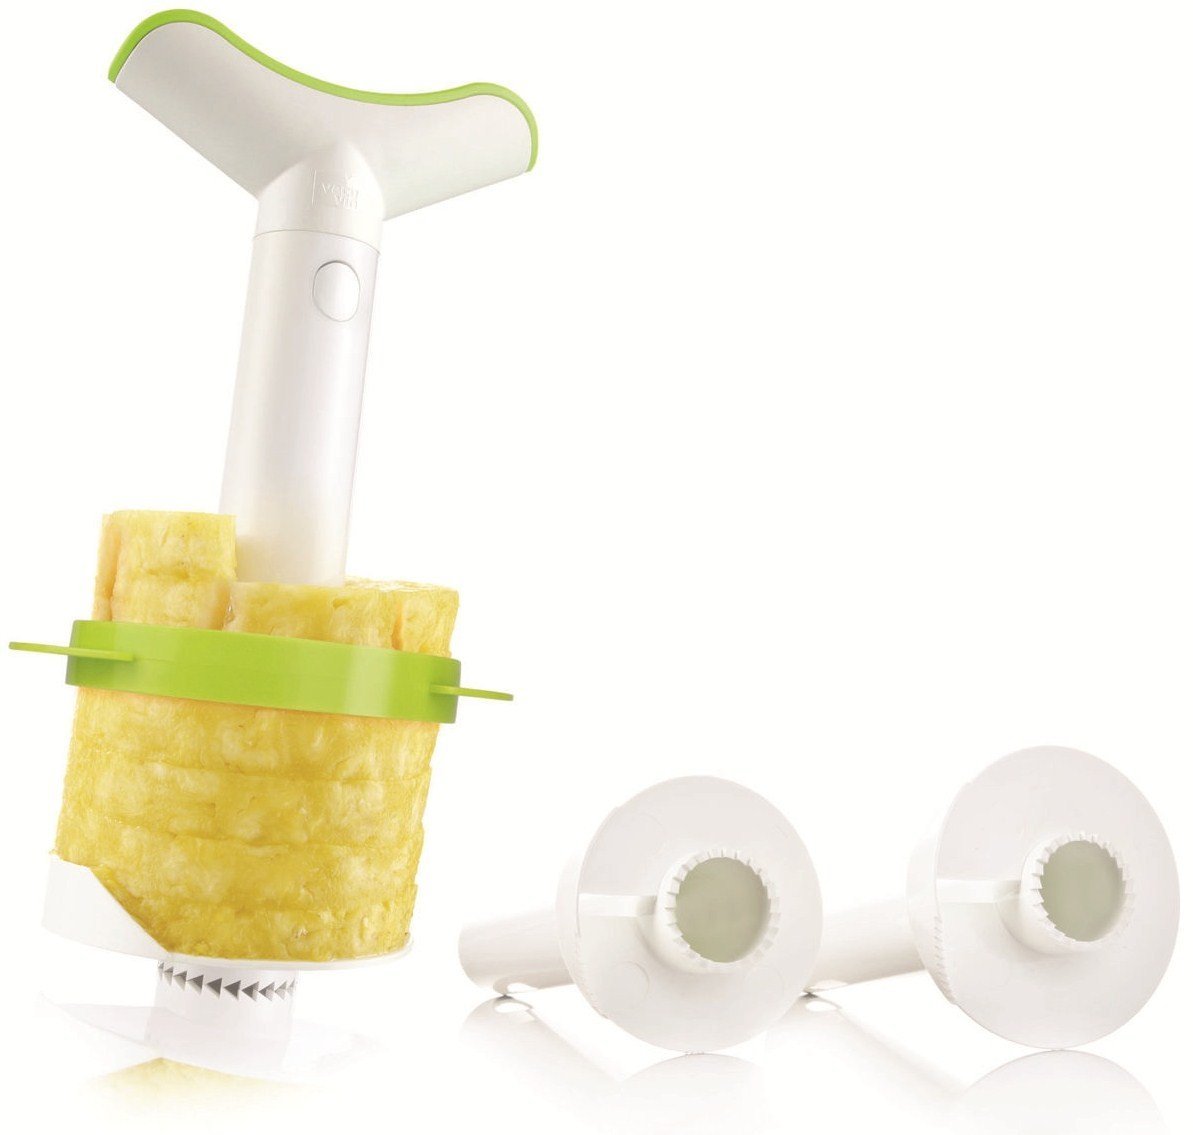 Pineapple Slicer With Green Wedger & 3 Knives, Small, Medium & Large - Gift Box